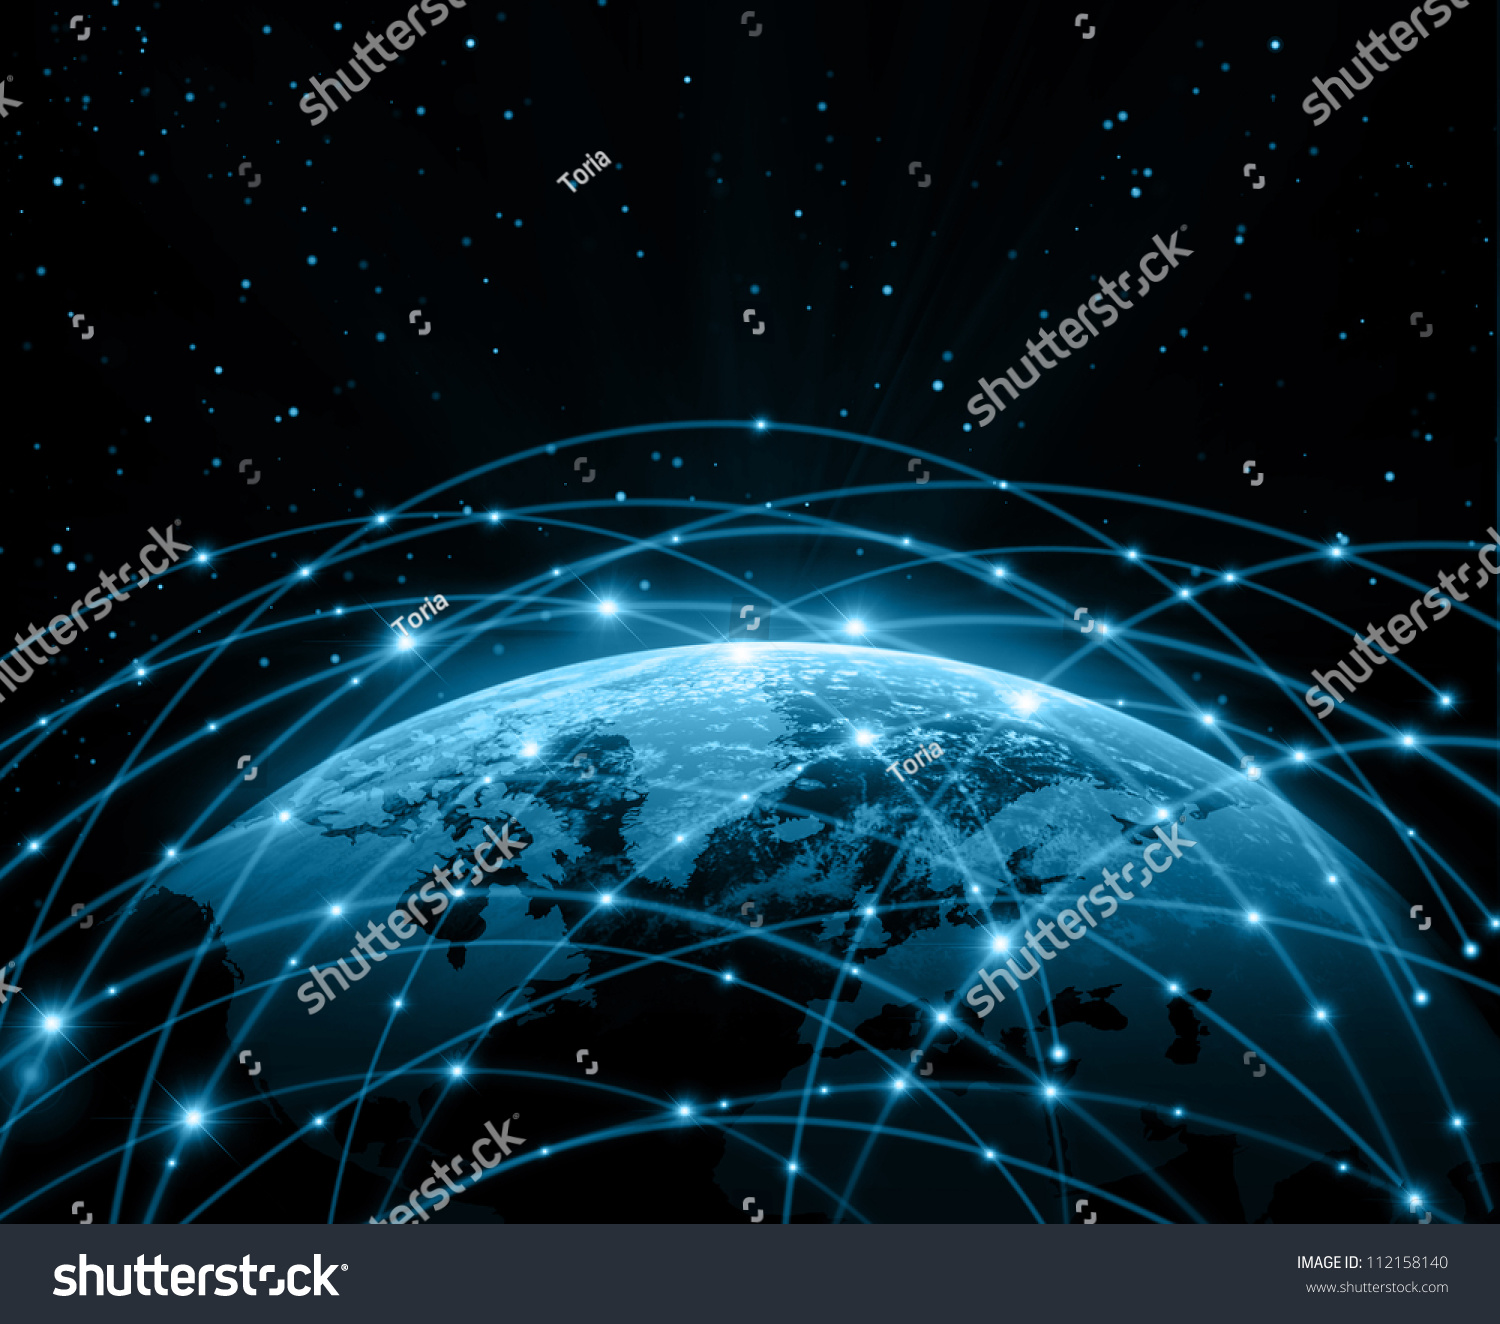 stock-photo-best-internet-concept-of-global-business-from-concepts-series-112158140.jpg